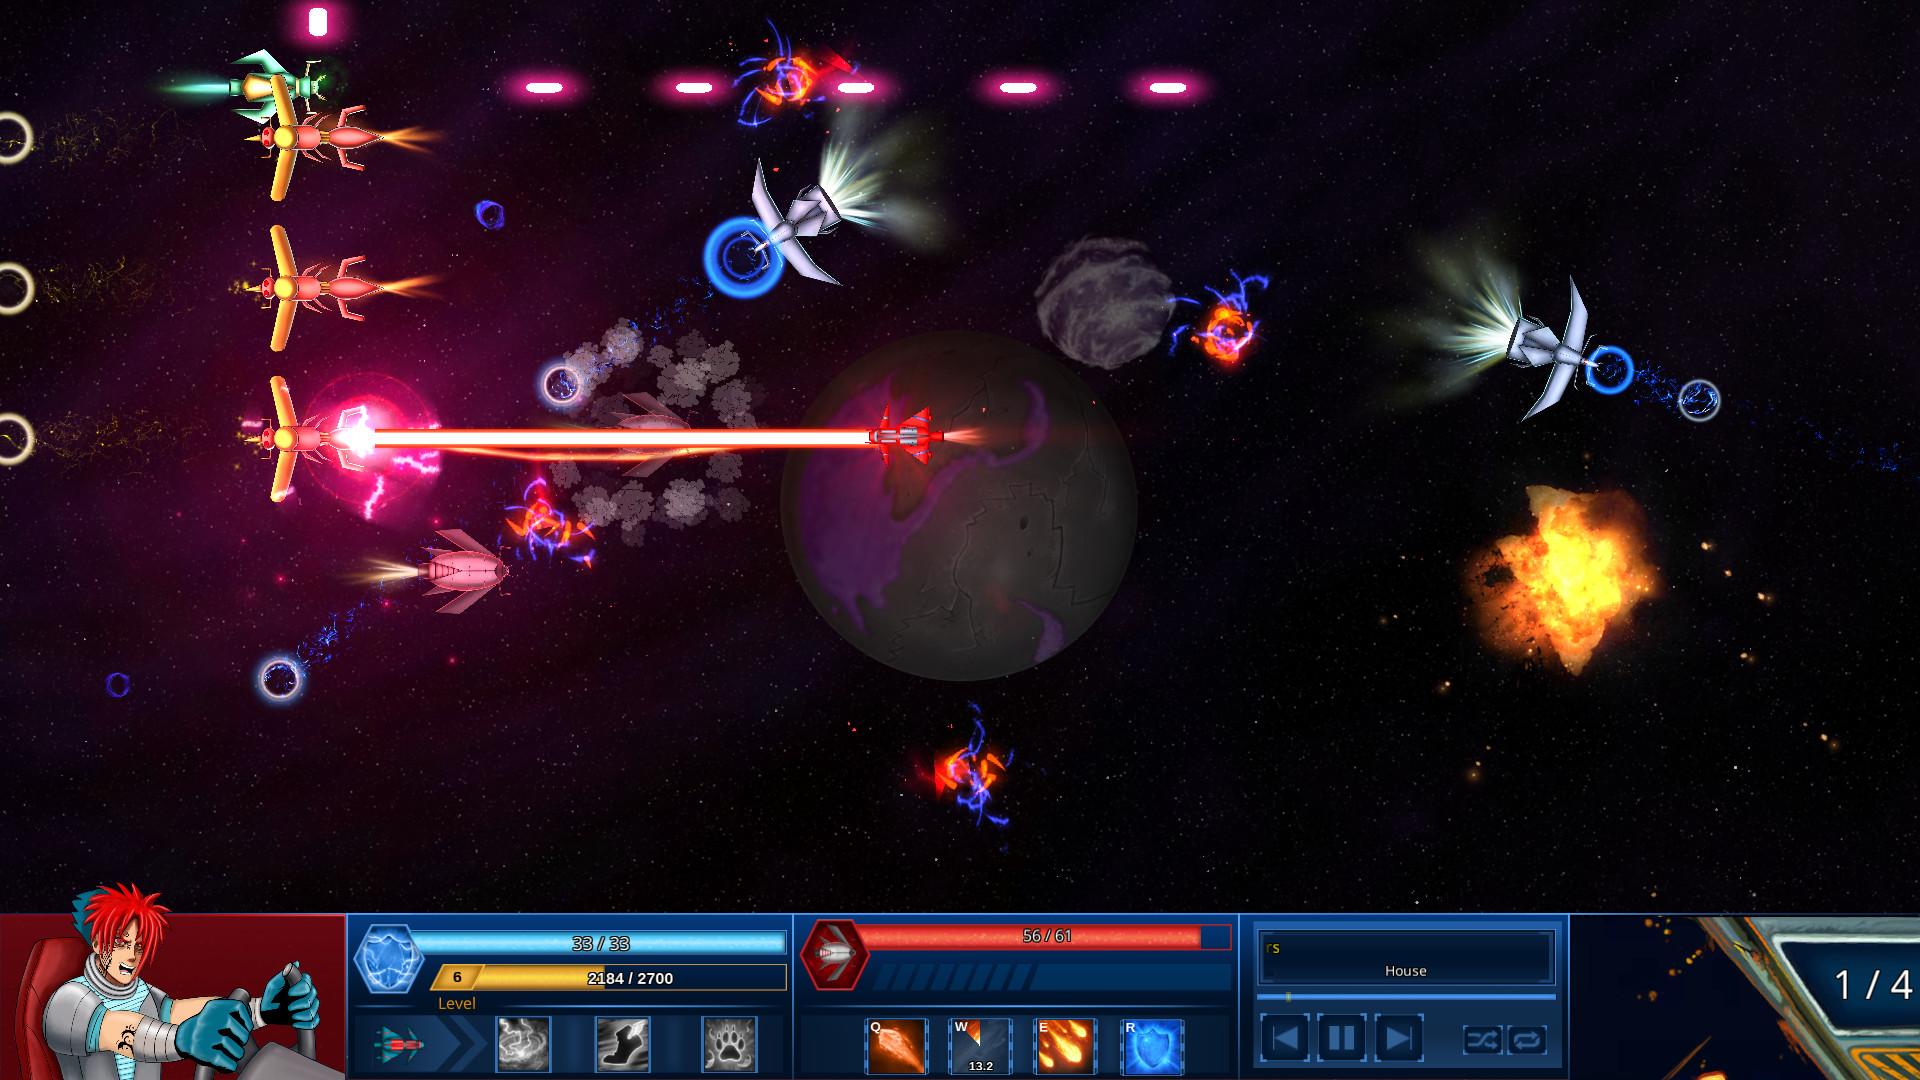 Screenshot №29 from game Survive in Space